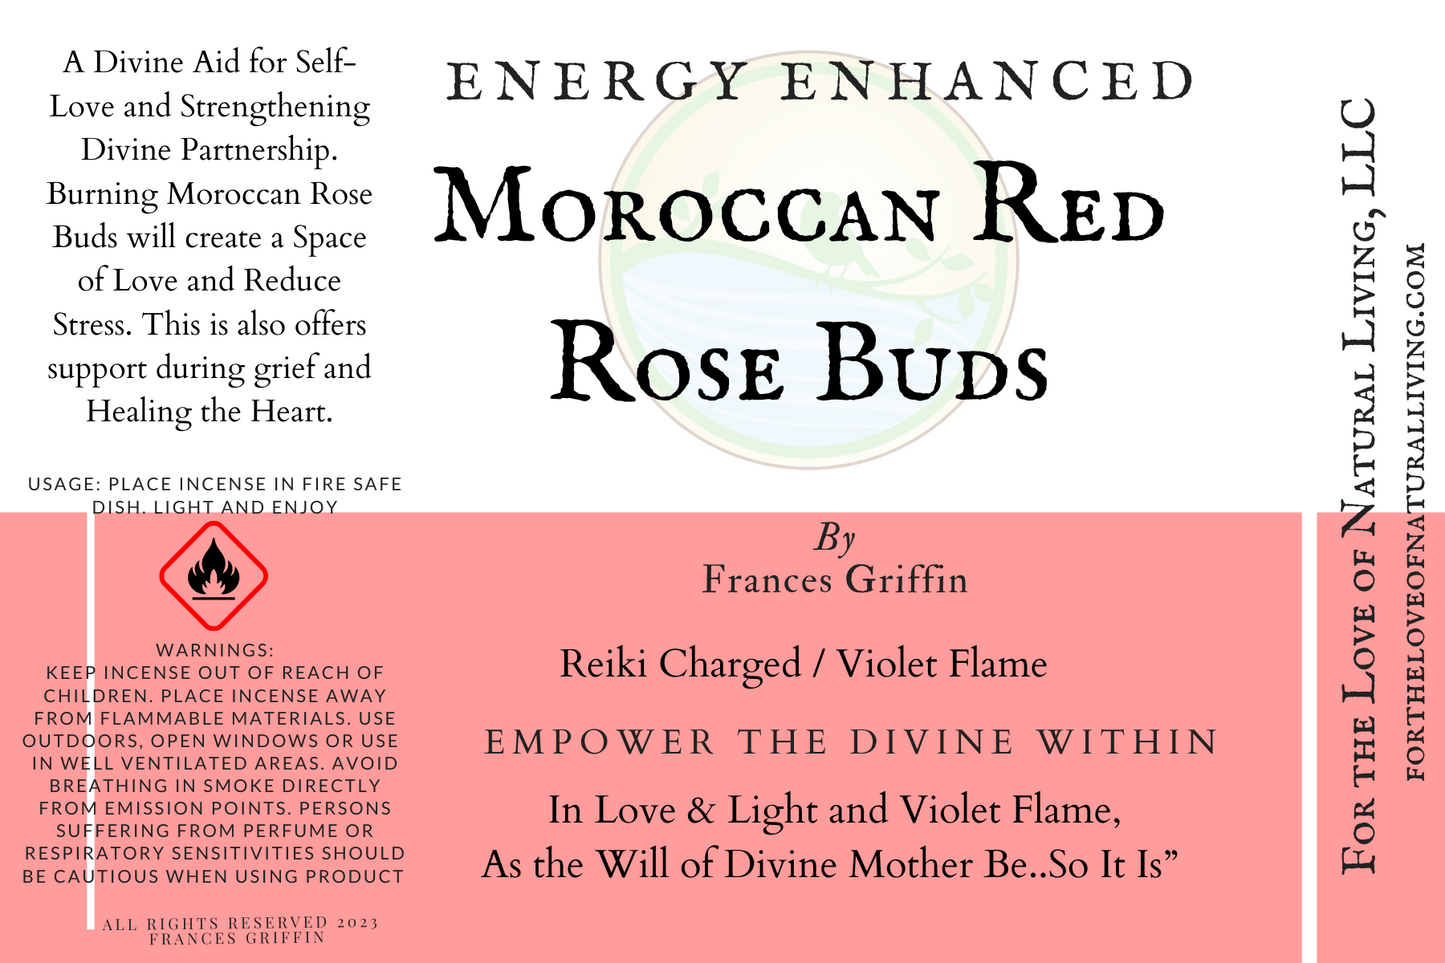 Moroccan Red Rose Buds - For the Love of Natural Living, LLC 